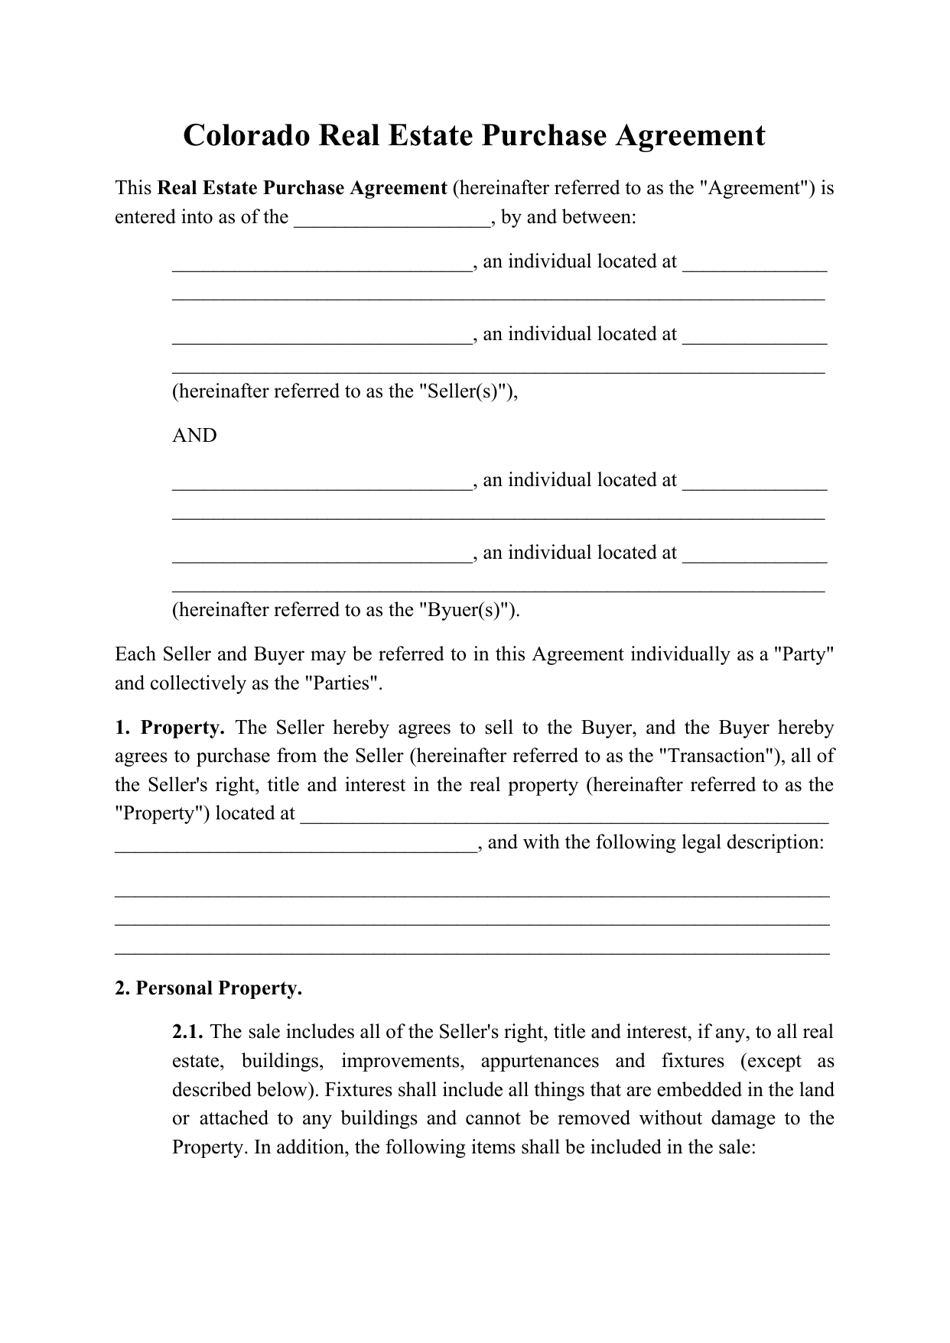 colorado-real-estate-purchase-agreement-template-fill-out-sign